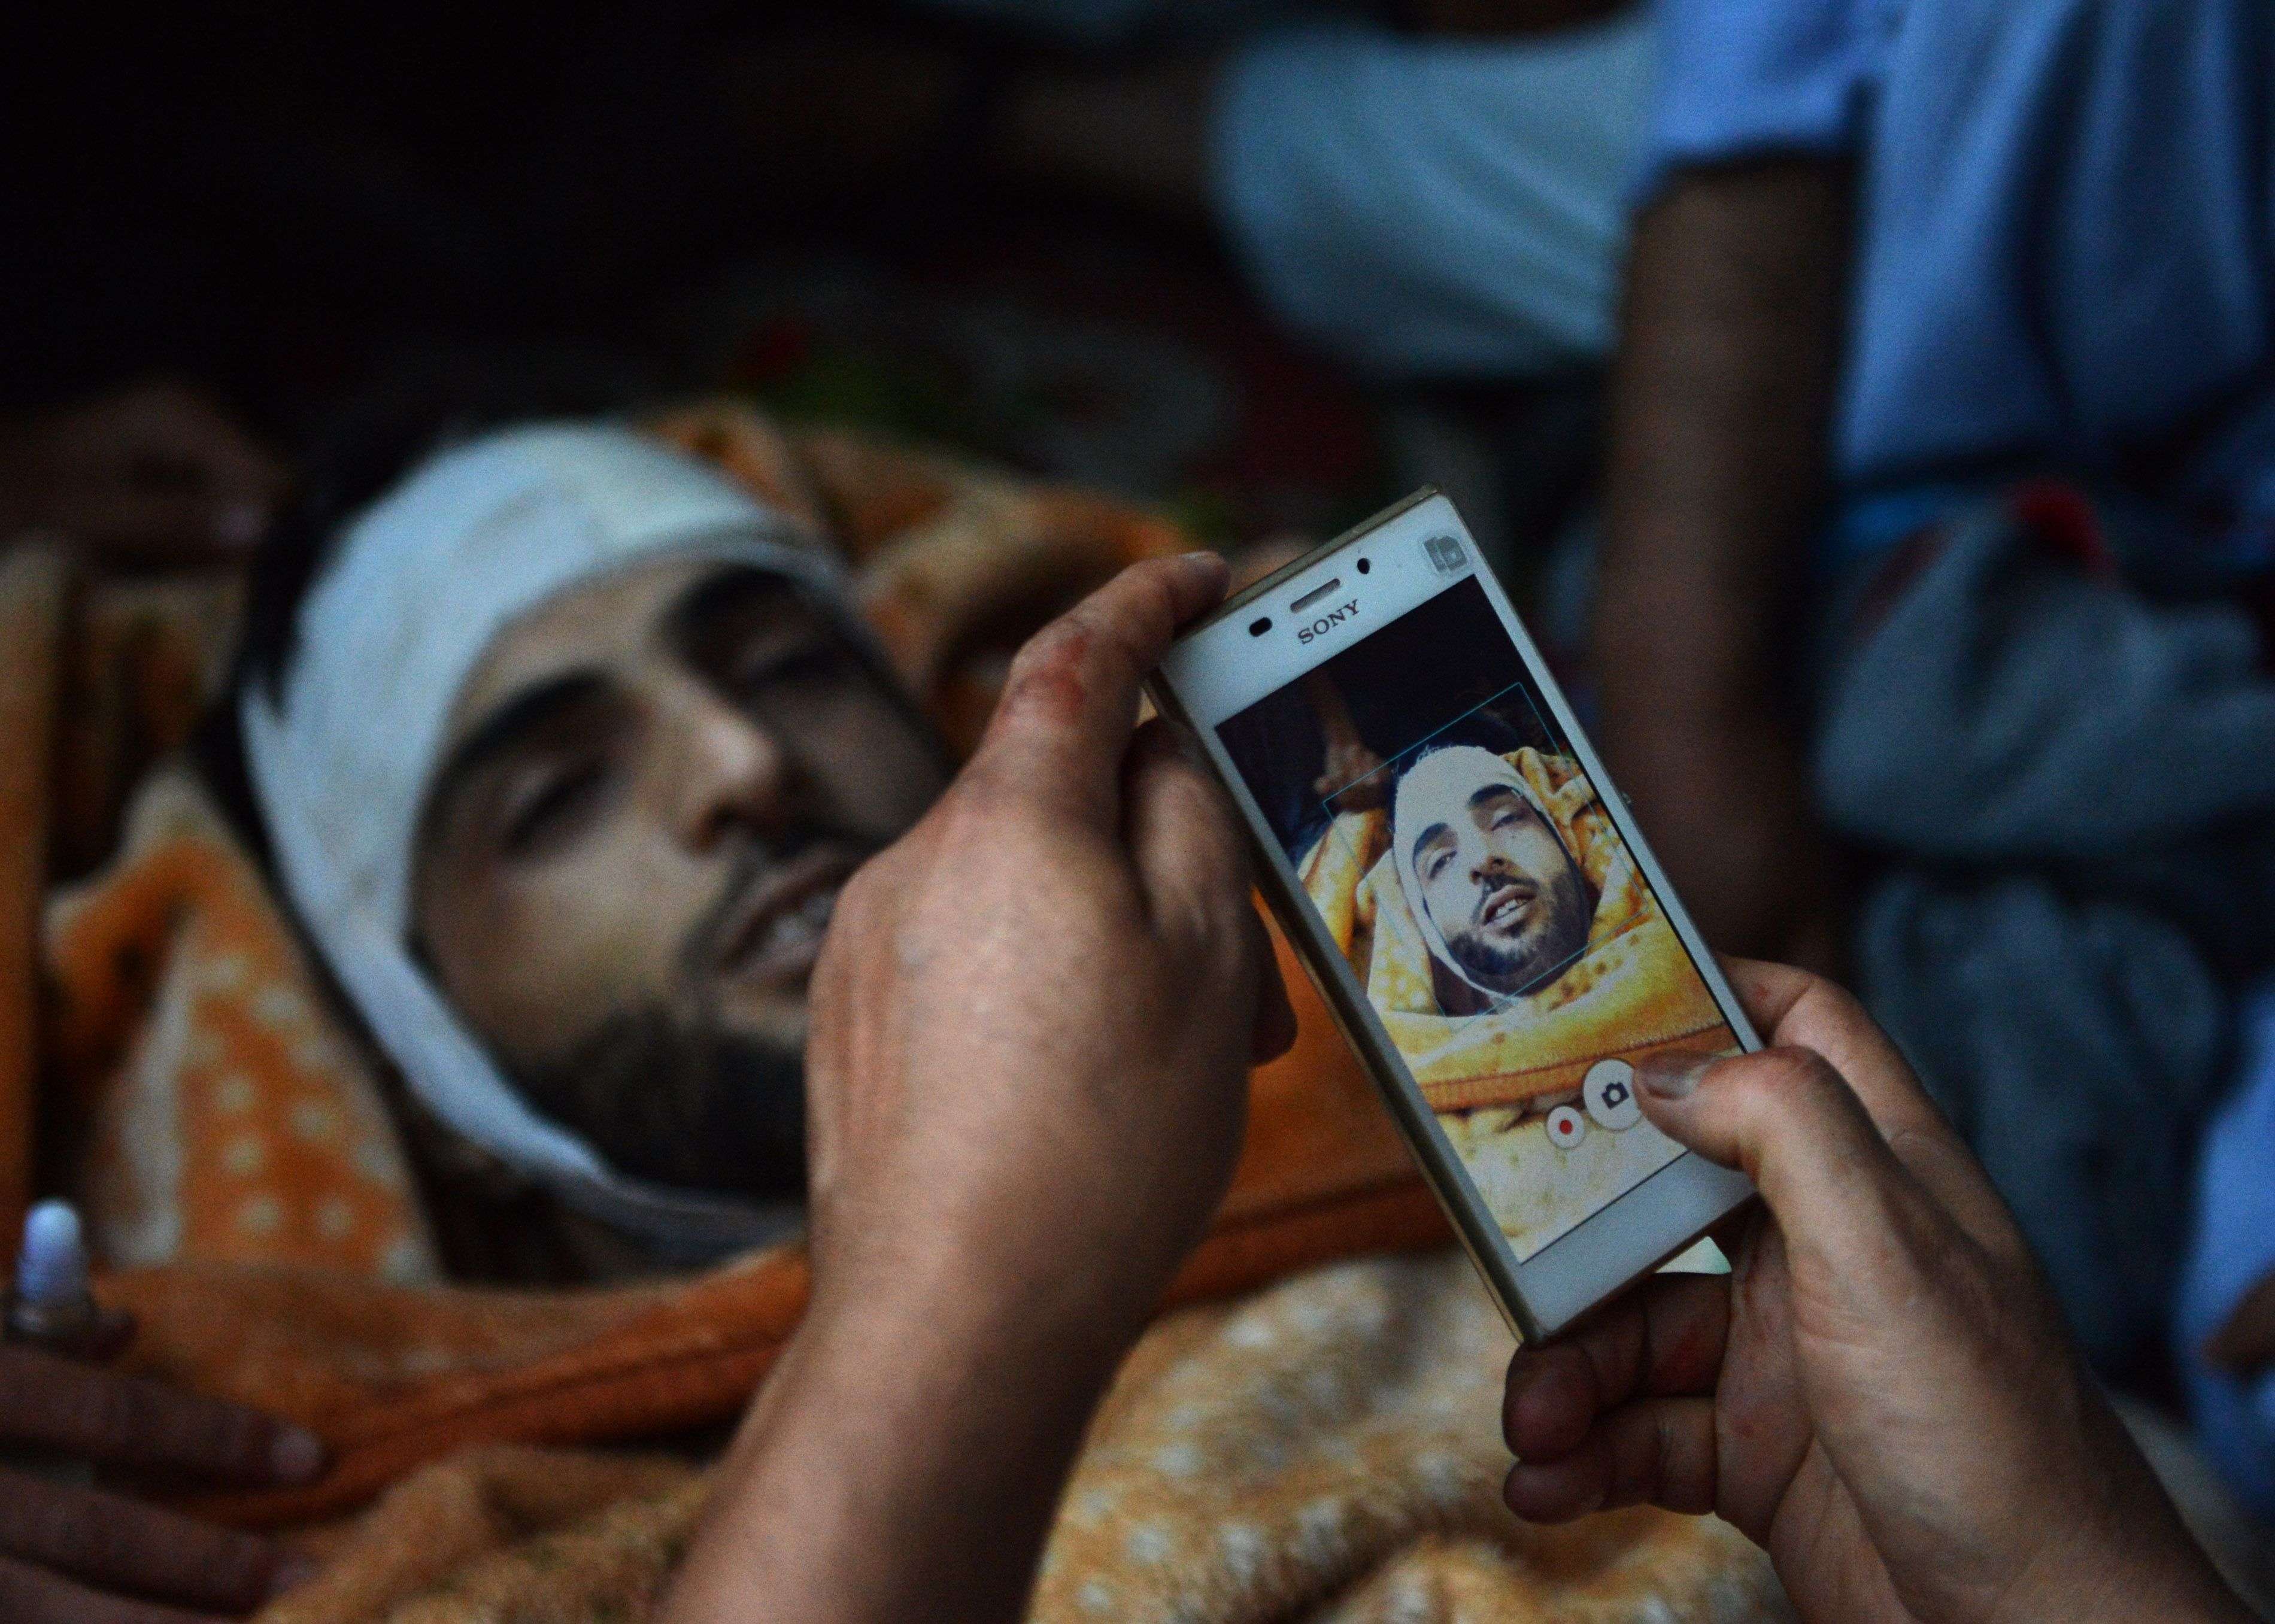 (FILES) In this photograph taken on July 9, 2016, Kashmiri mourners take photographs of the body of Burhan Muzaffar Wani, the new-age poster boy for the rebel movement in the restive Himalayan state of Jammu and Kashmir, ahead of his funeral in Tral, his native town, 42kms south of Srinagar. Burhan Wani was part of a new generation of young, educated Kashmiri militants using social media to spread their demands for independence from Indian rule, turning growing Internet use in the restive region into a powerful recruiting tool. Wani, whose death in a shoot-out with government forces has triggered deadly clashes with protesters in Indian Kashmir, was the son of a headmaster who excelled at school before he left home aged just 15 to join the region's largest rebel group. / AFP PHOTO / TAUSEEF MUSTAFA